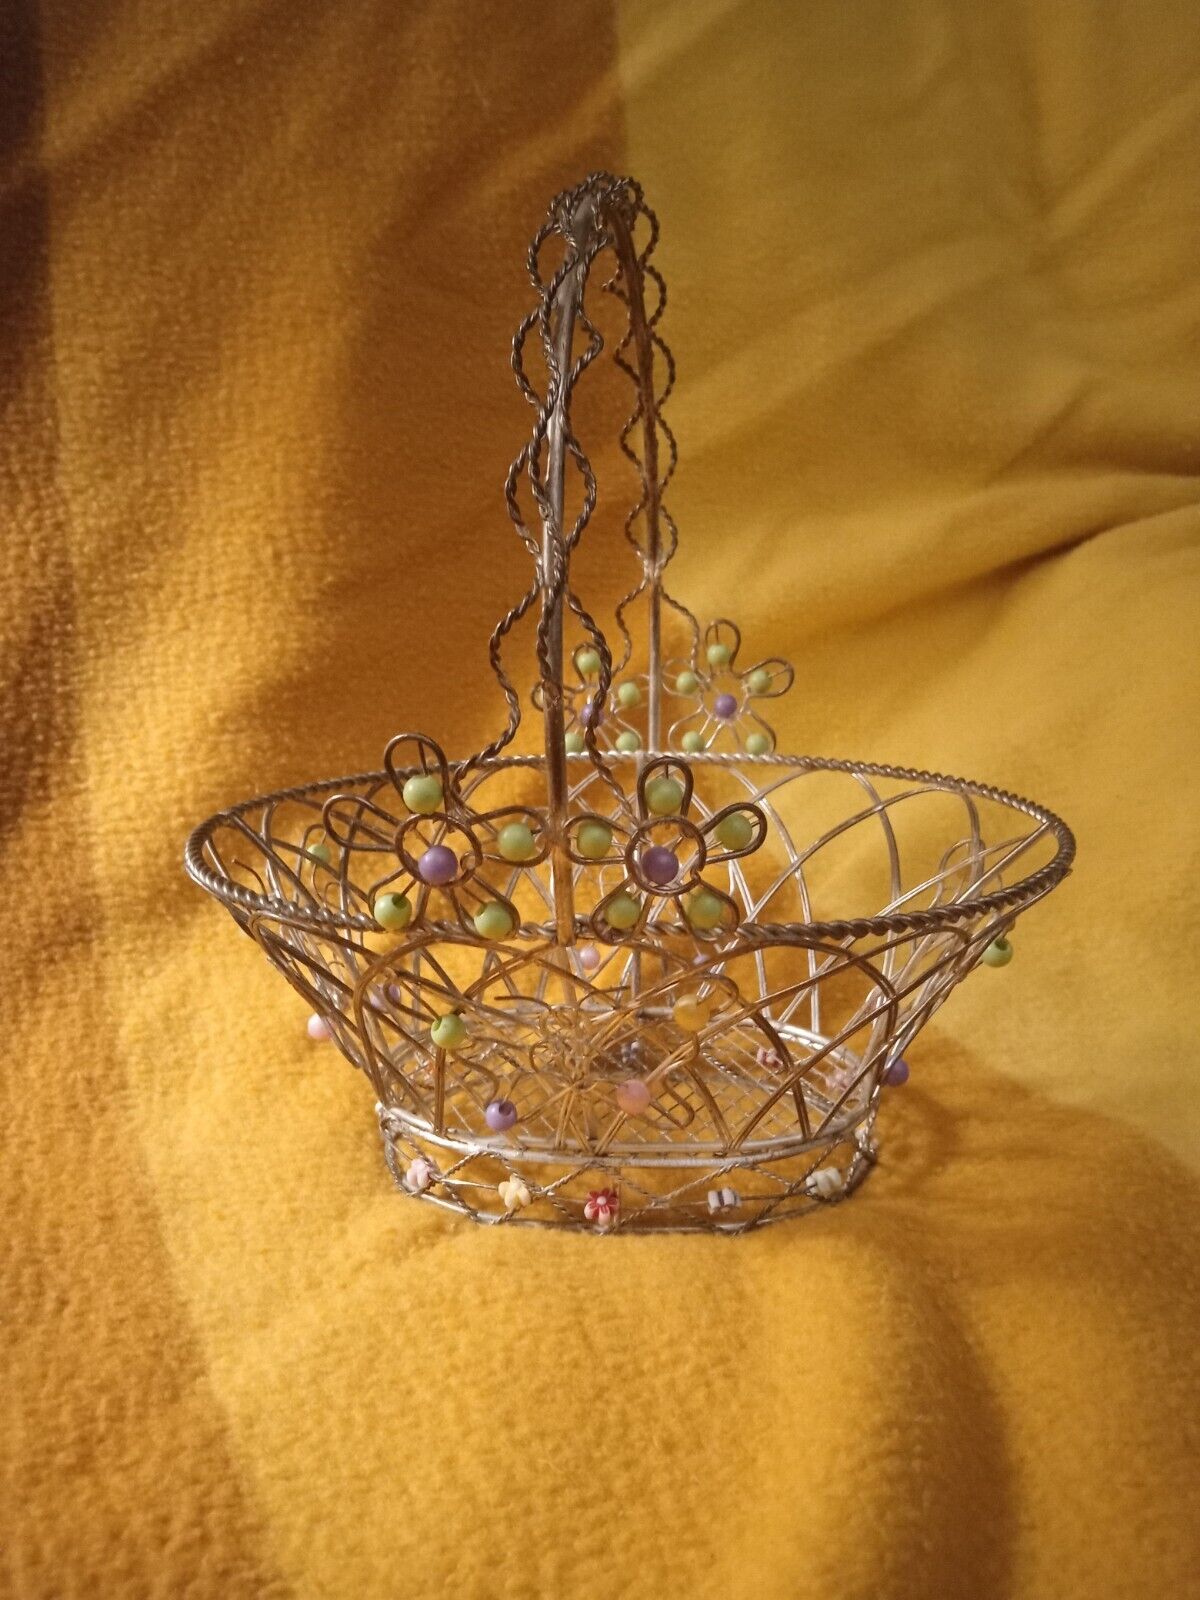 Vintage Metal Wire Basket With Beads & Flowers